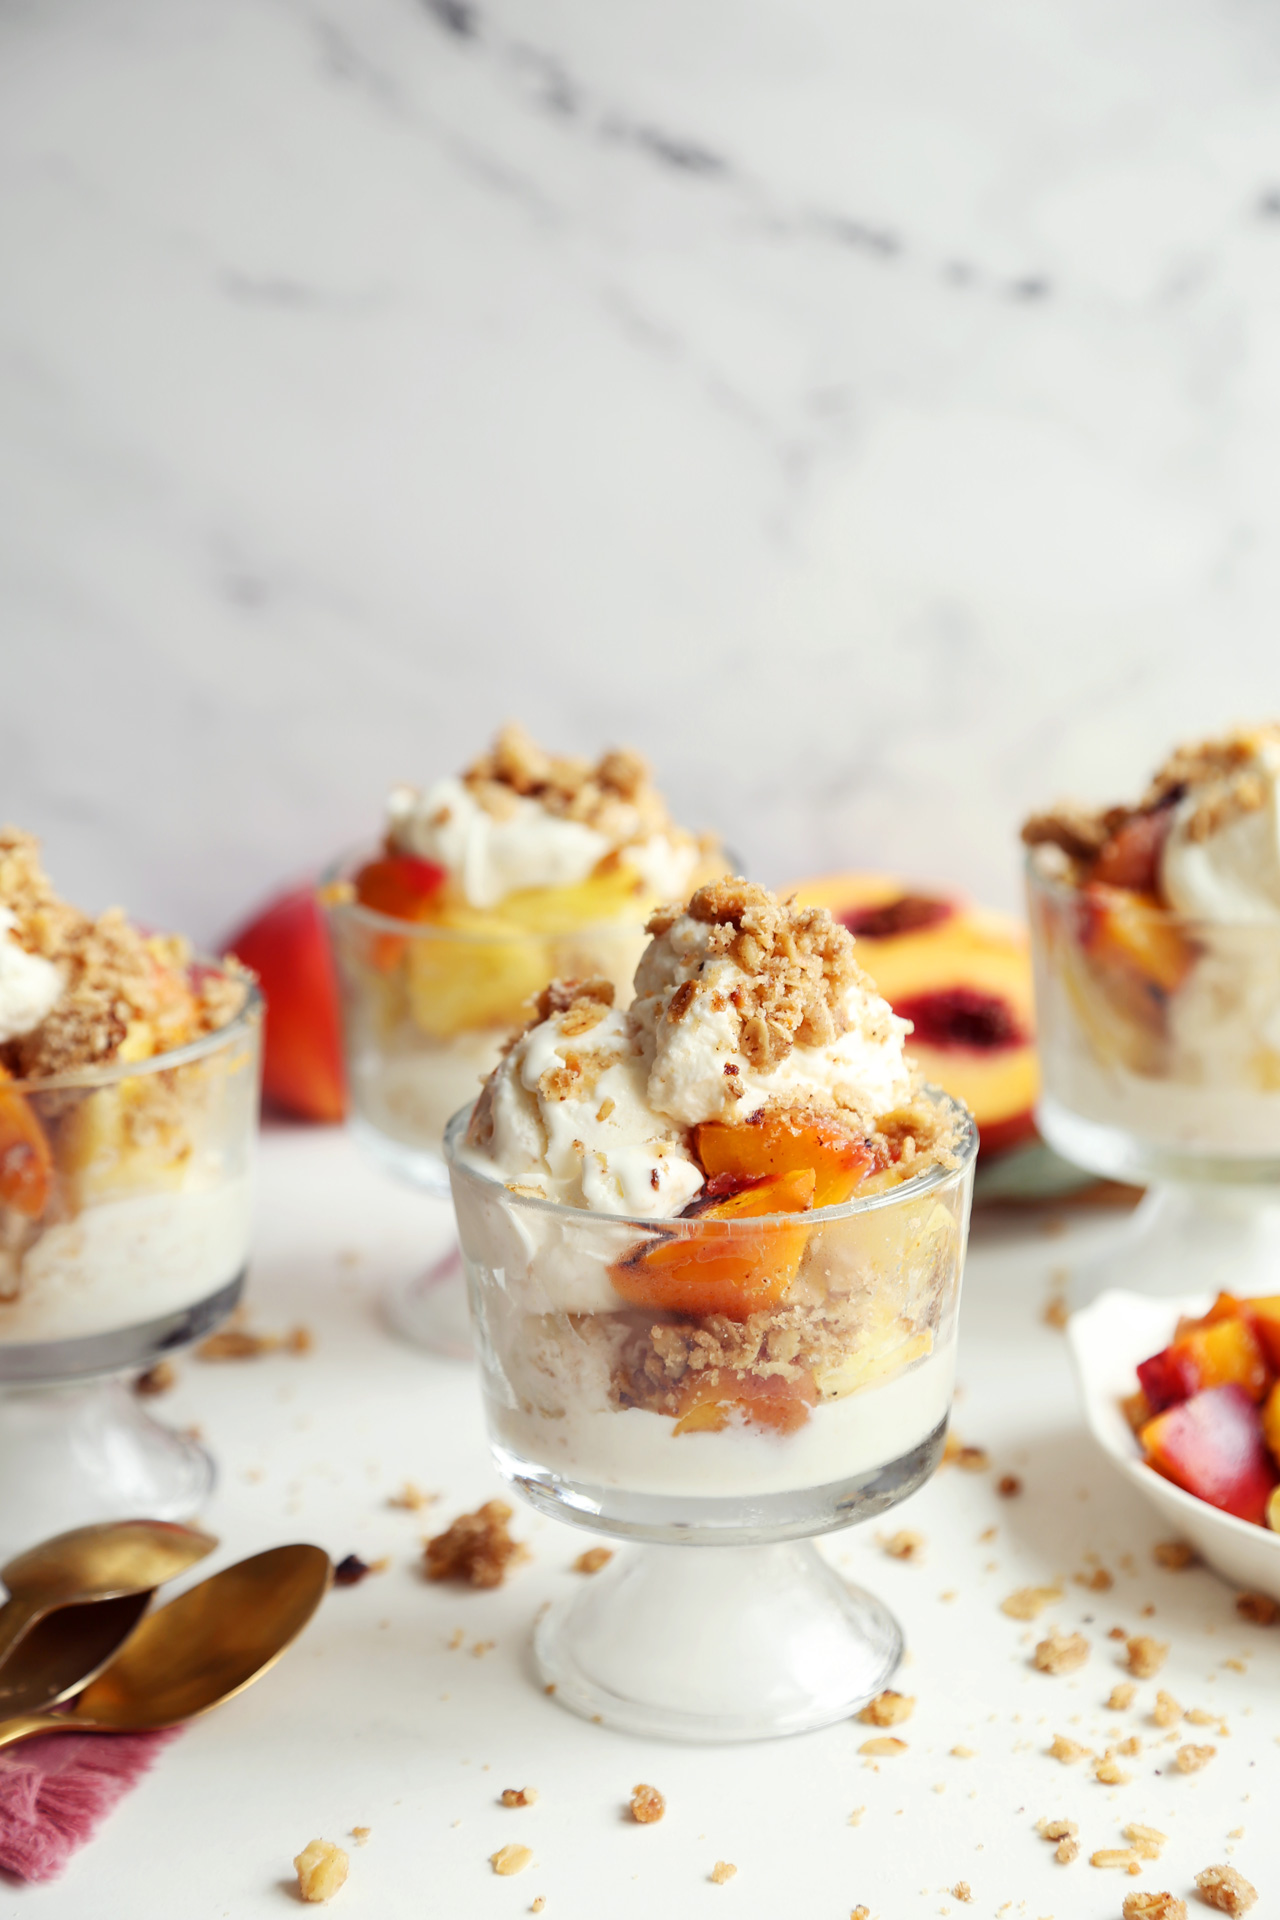 Grilled Brown Butter Peach and Pineapple Sundaes